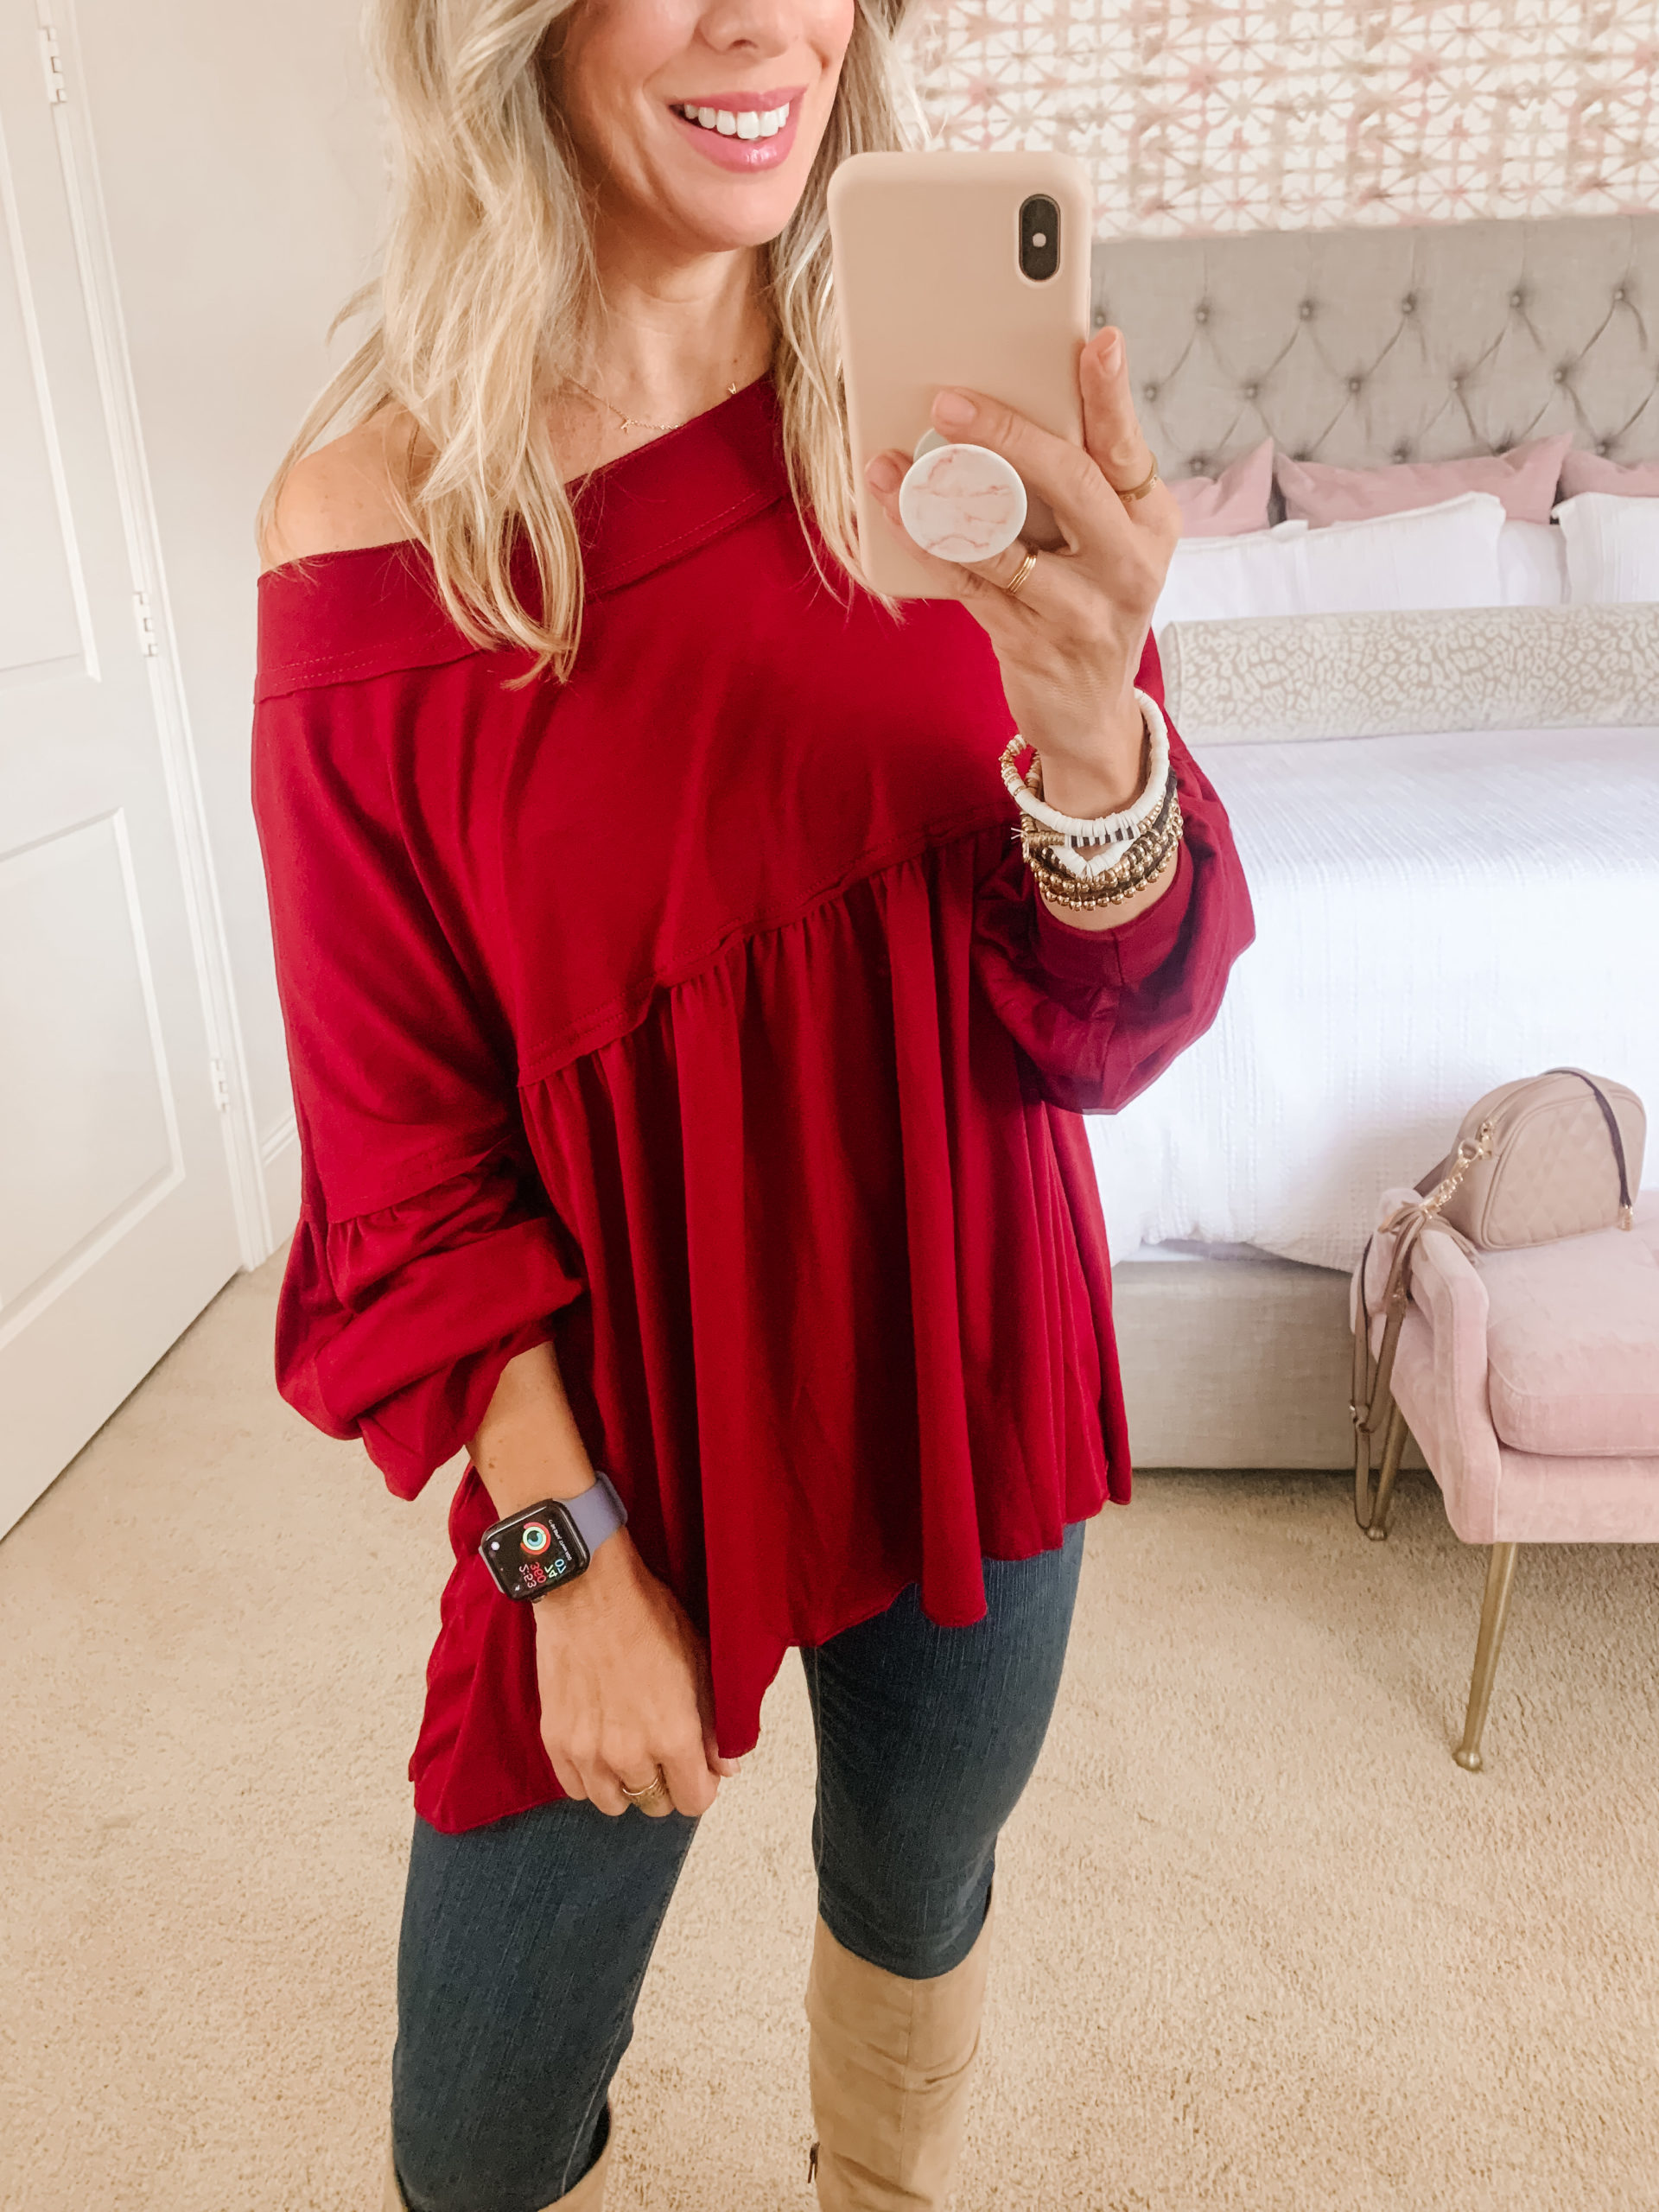 Amazon Fashion, Off Shoulder Red Top, Jeans, Boots 